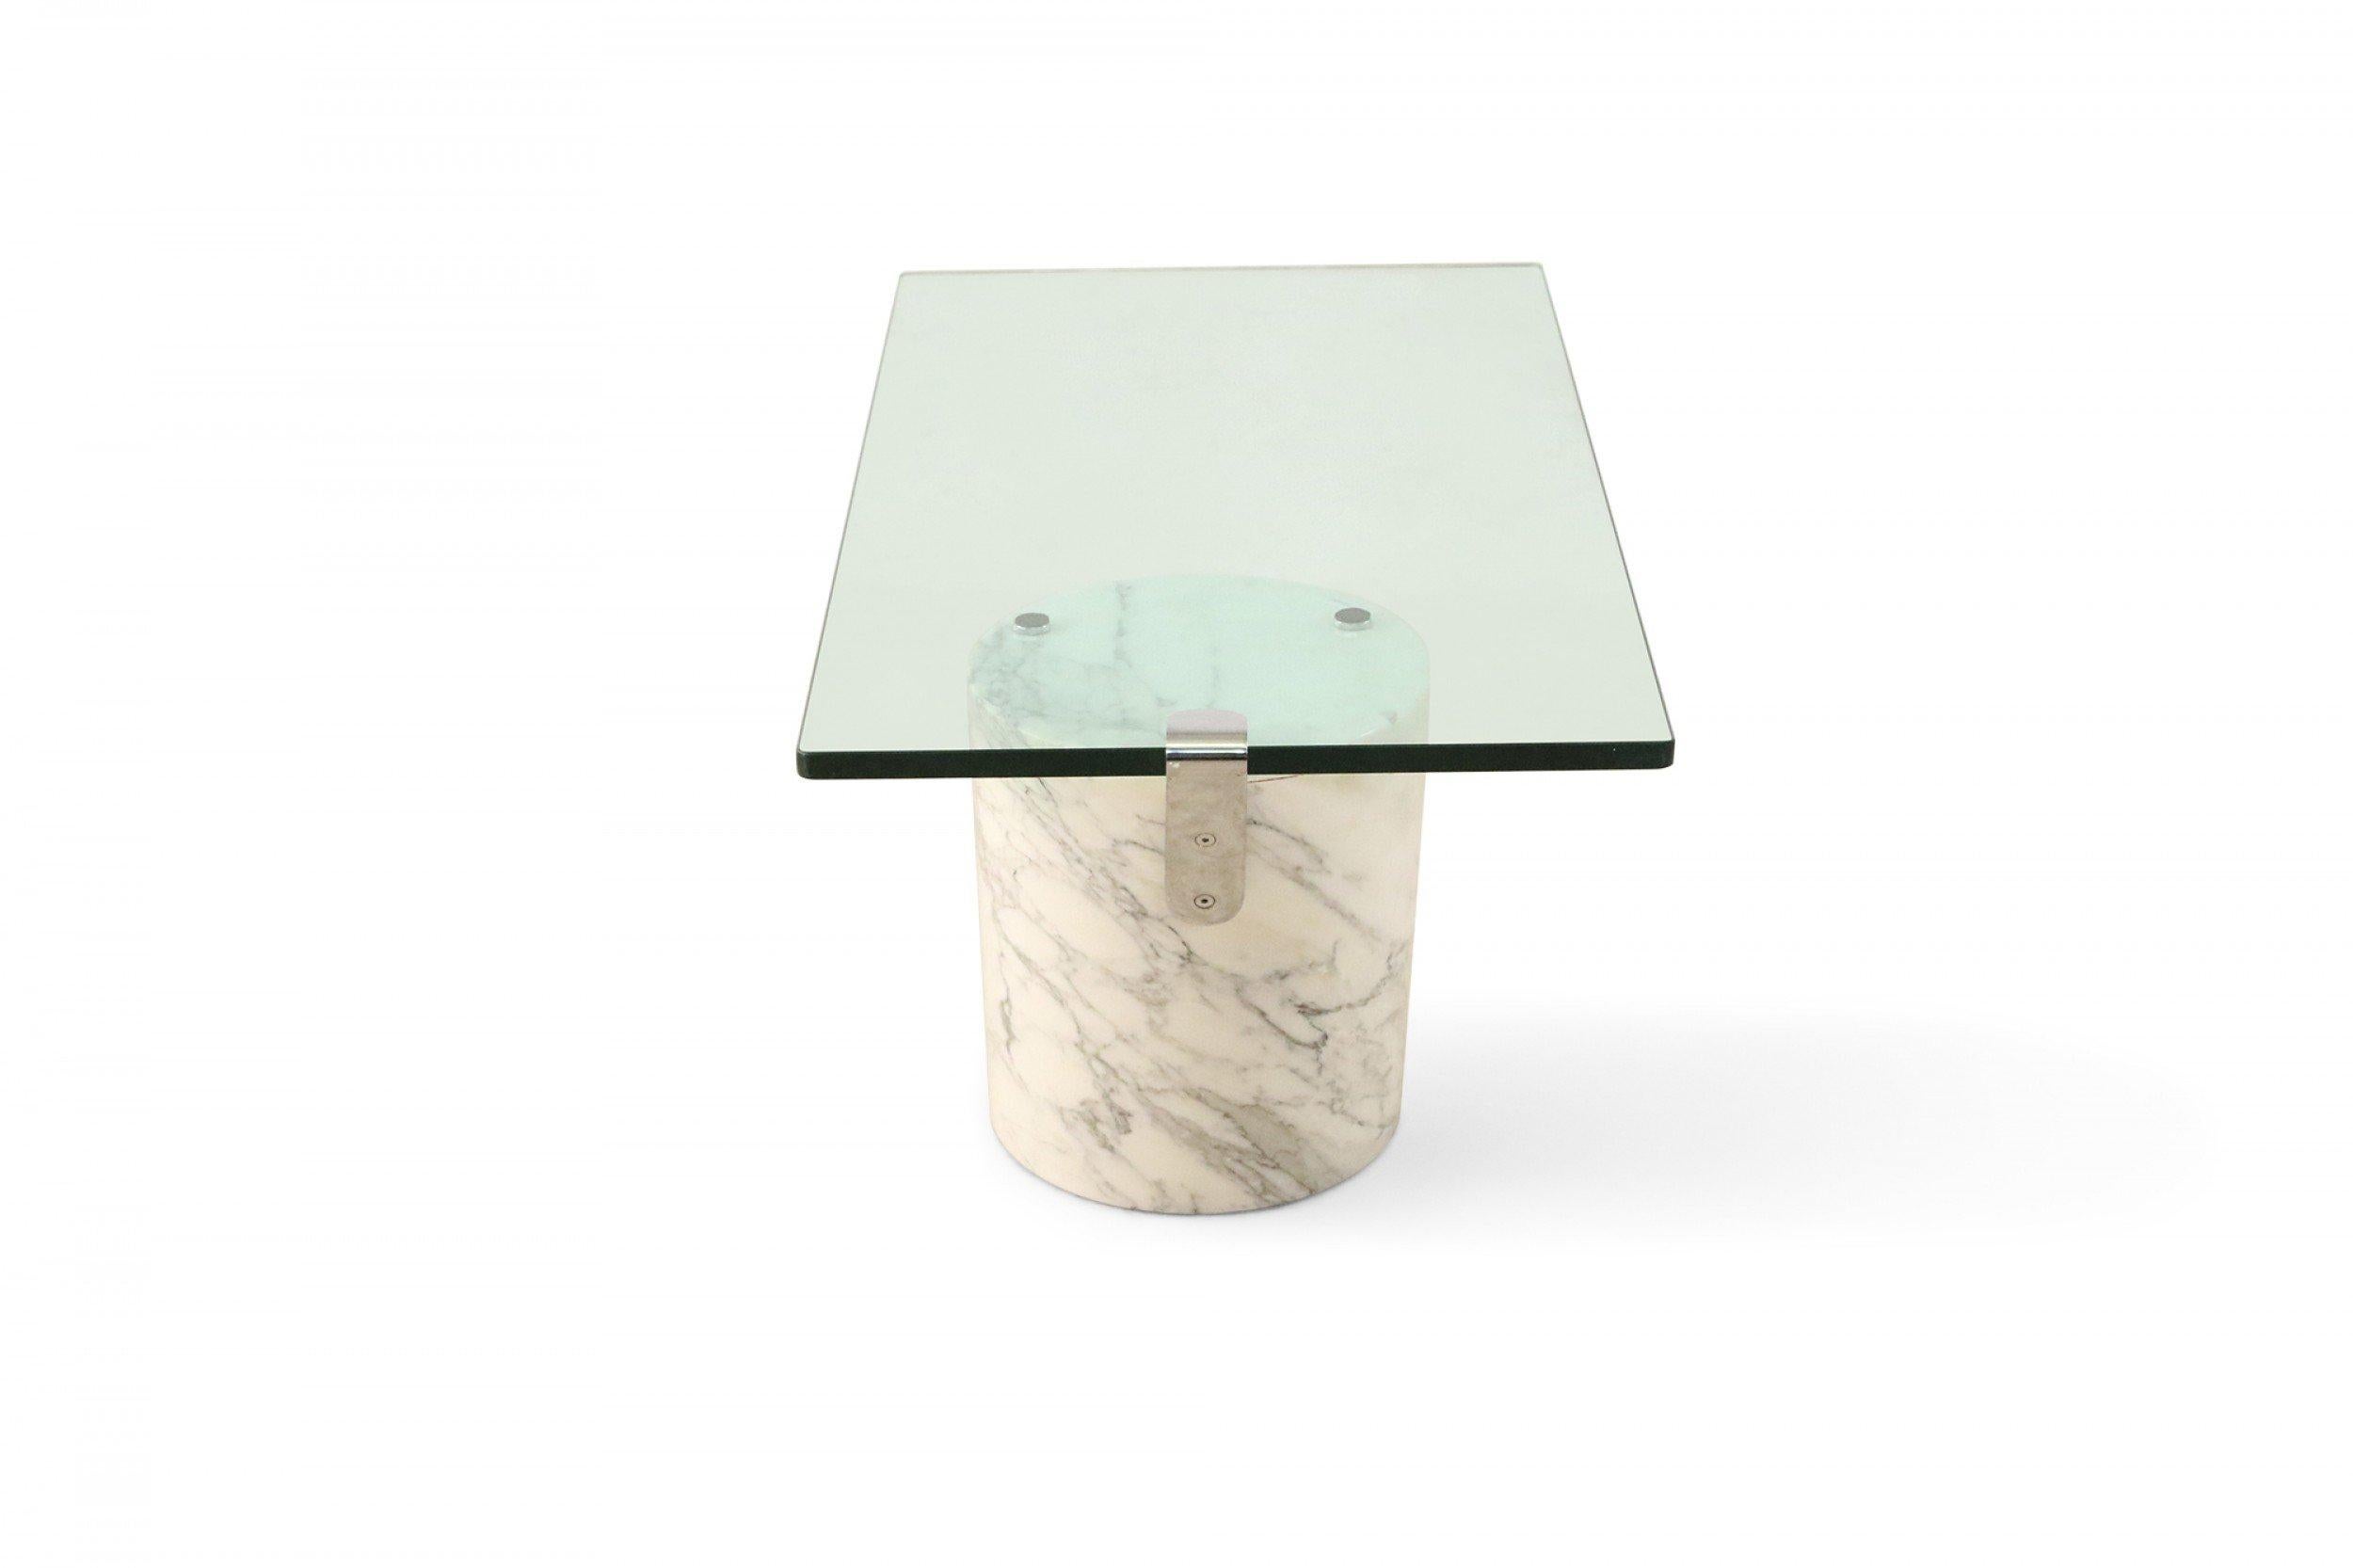 Mid-Century Modern German coffee table with angled cylindrical white Carrara marble base and floating rectangular glass tabletop (RONALD SCHMITT FOR BRUETON).